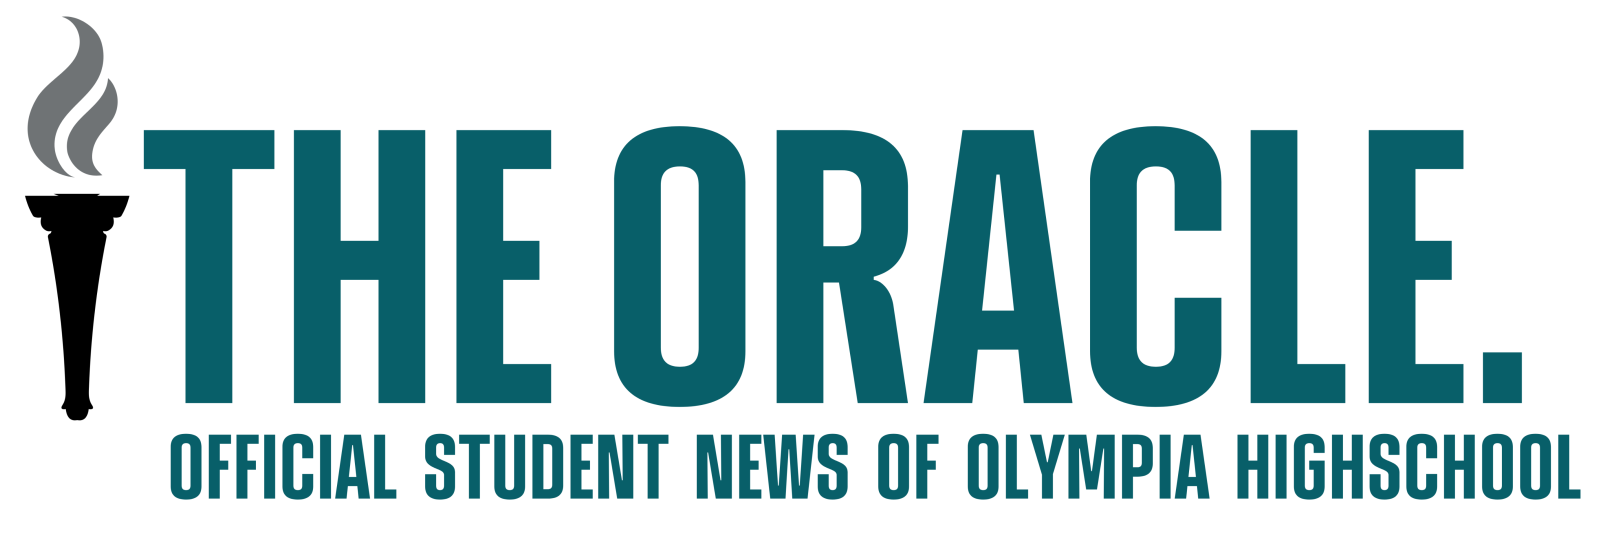 The Student News Site of Olympia High School